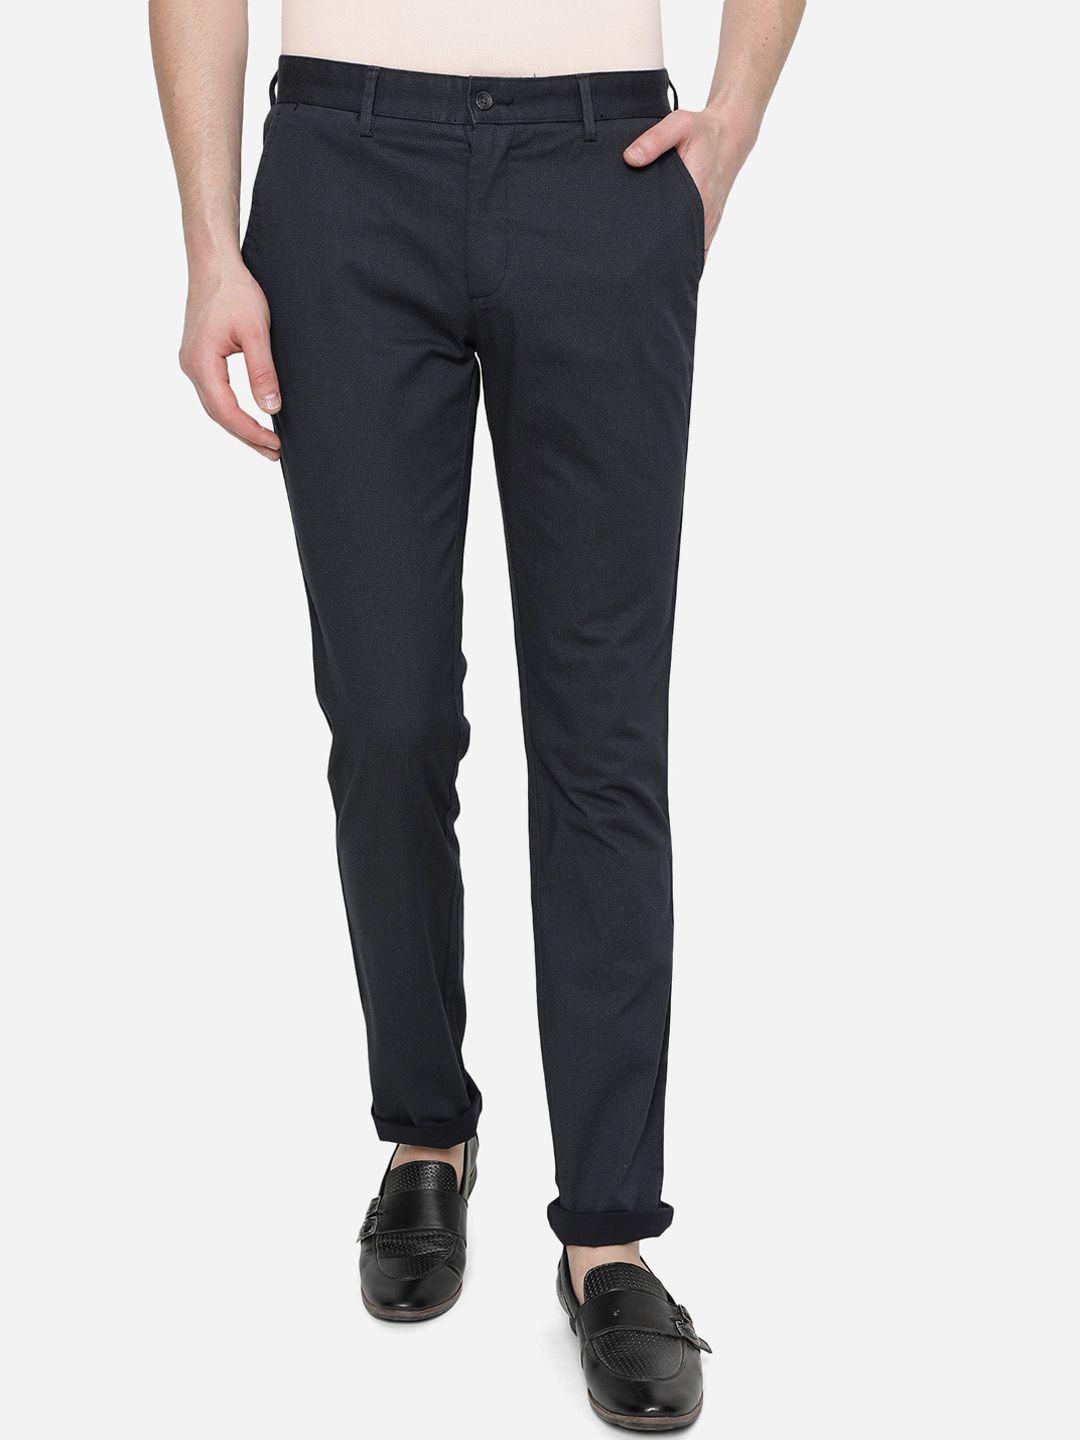 greenfibre-men-navy-blue-skinny-fit-trousers